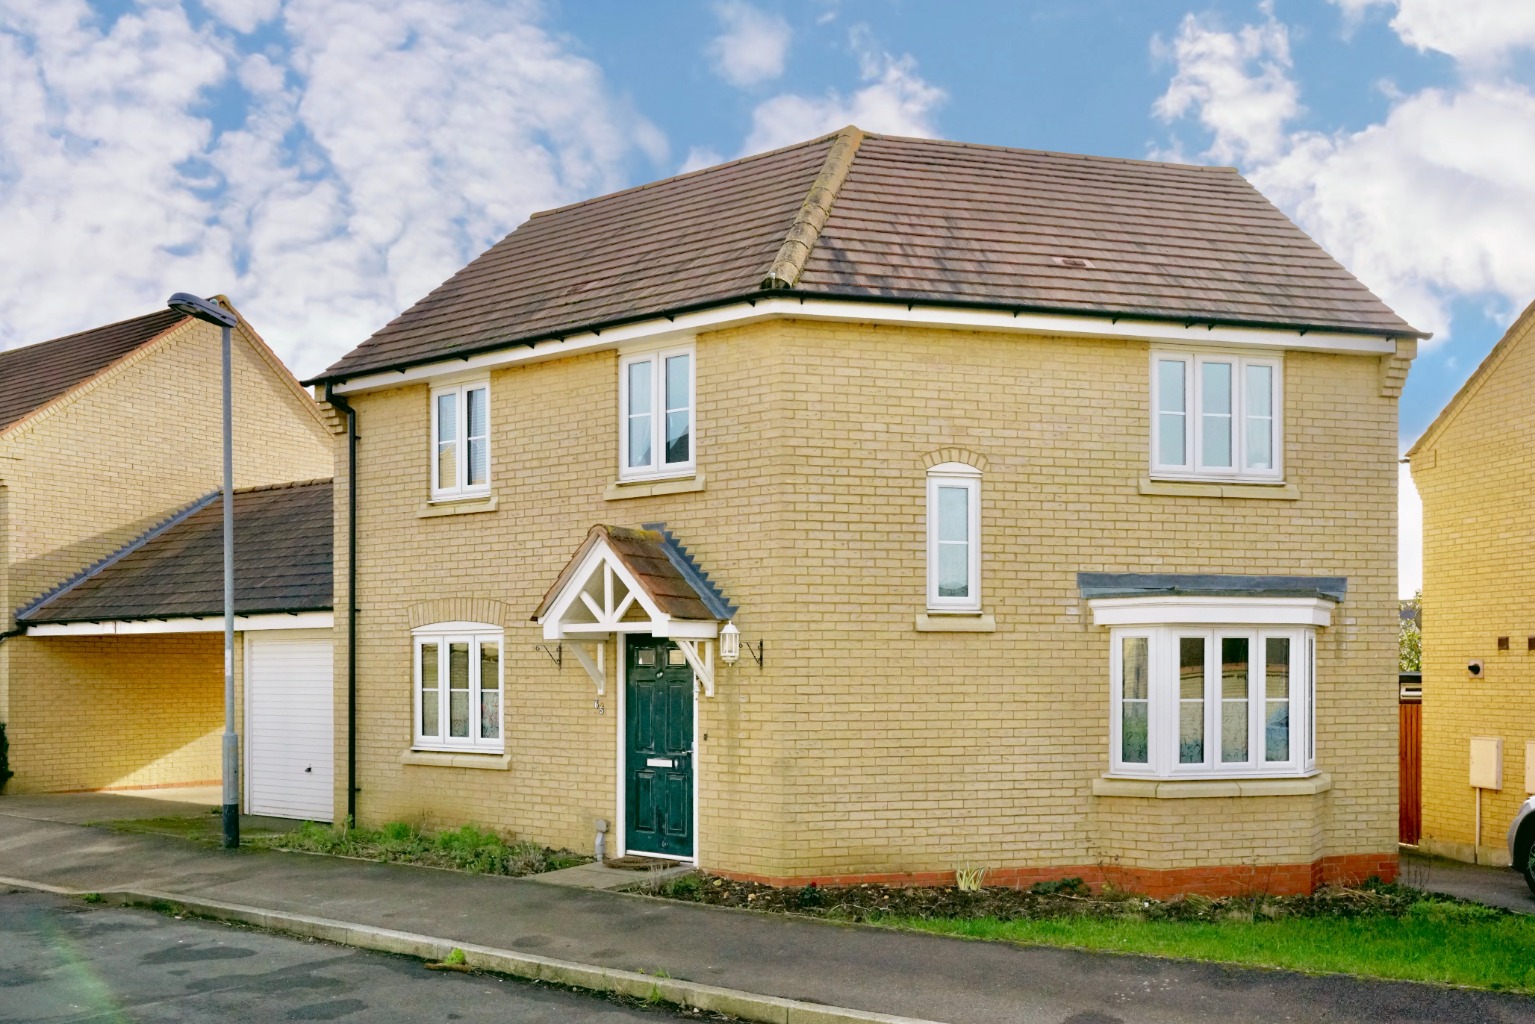 3 bed detached house for sale in Lannesbury Crescent, St. Neots - Property Image 1